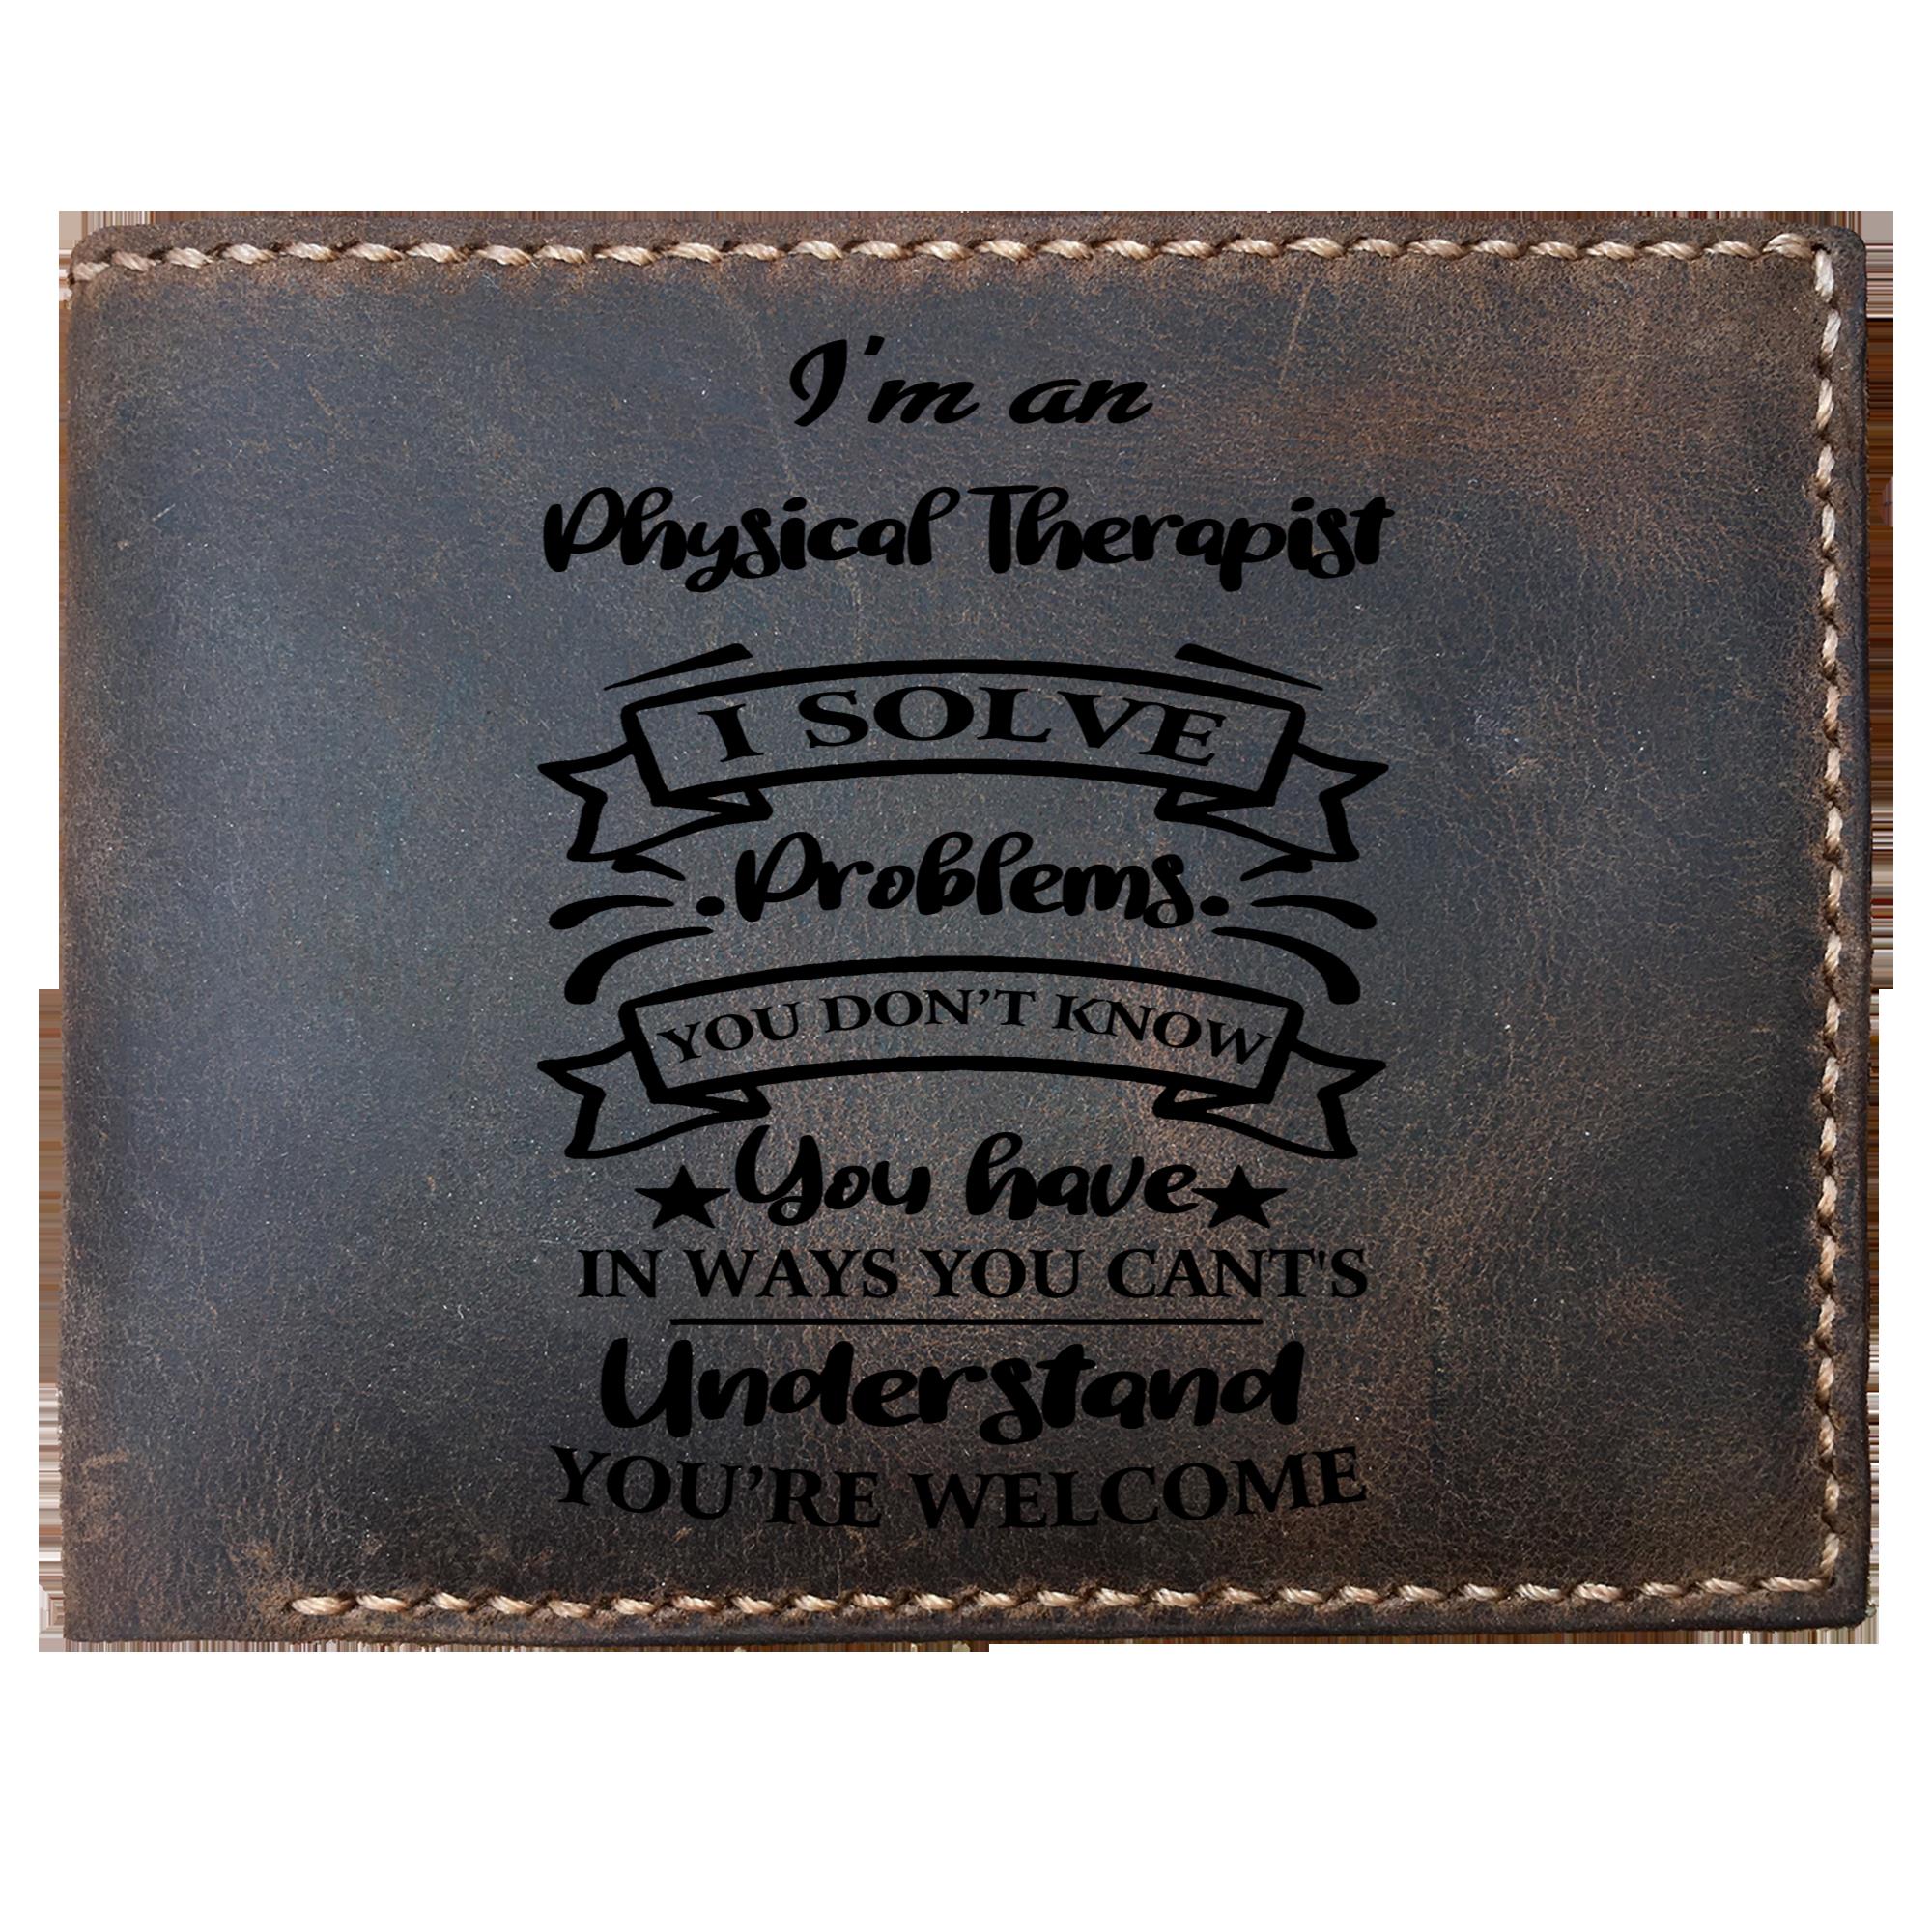 Skitongifts Funny Custom Laser Engraved Bifold Leather Wallet For Men, I'm an Physical Therapist Solve Problems, Father's Day Gifts